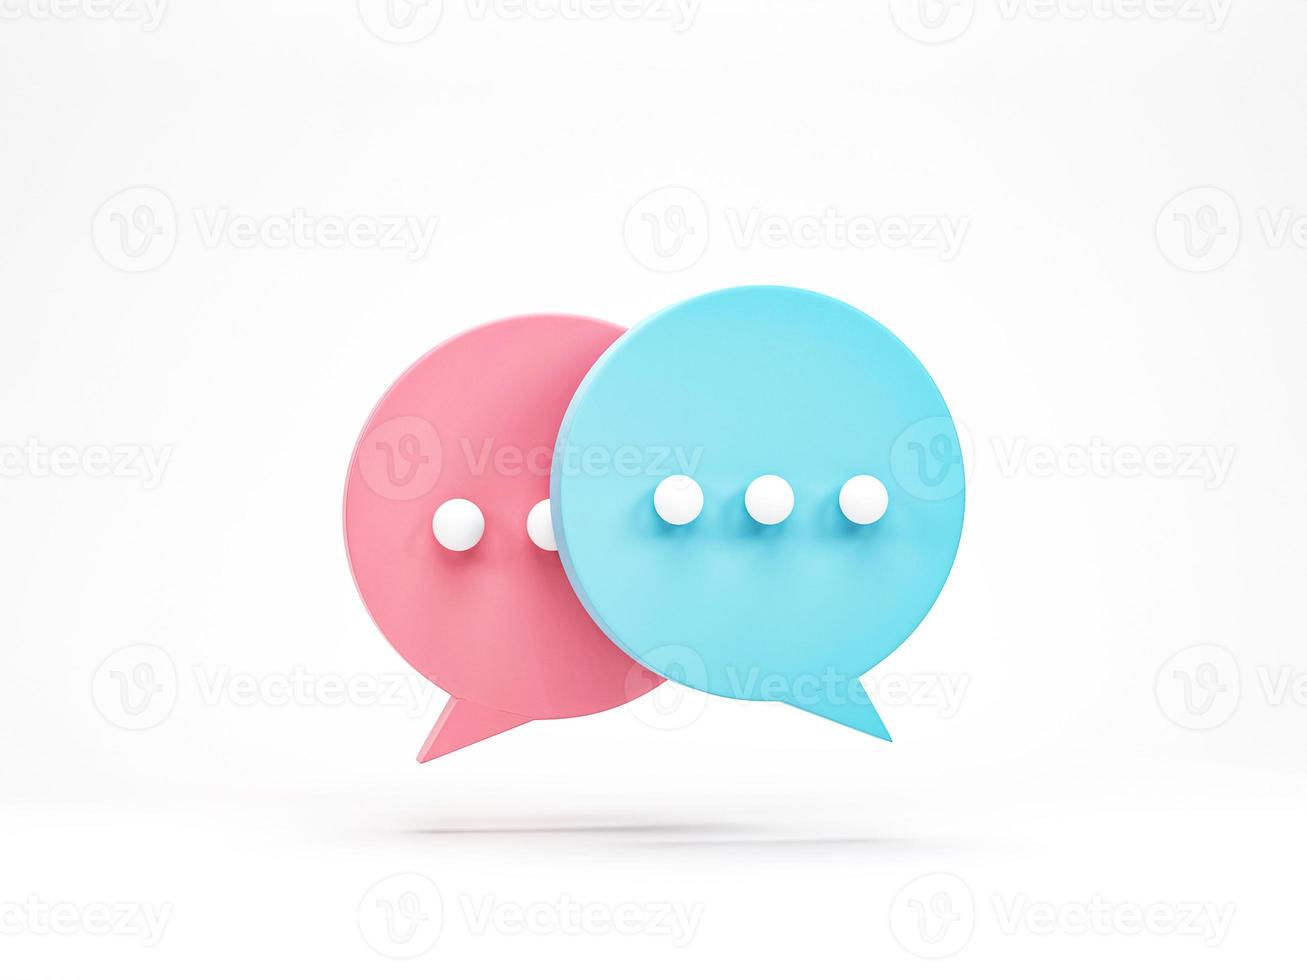 3D rendering, 3D illustration. chat bubble icon isolated on white background. Minimal pink and blue chat typing. Design element for social media, messages or comment. photo